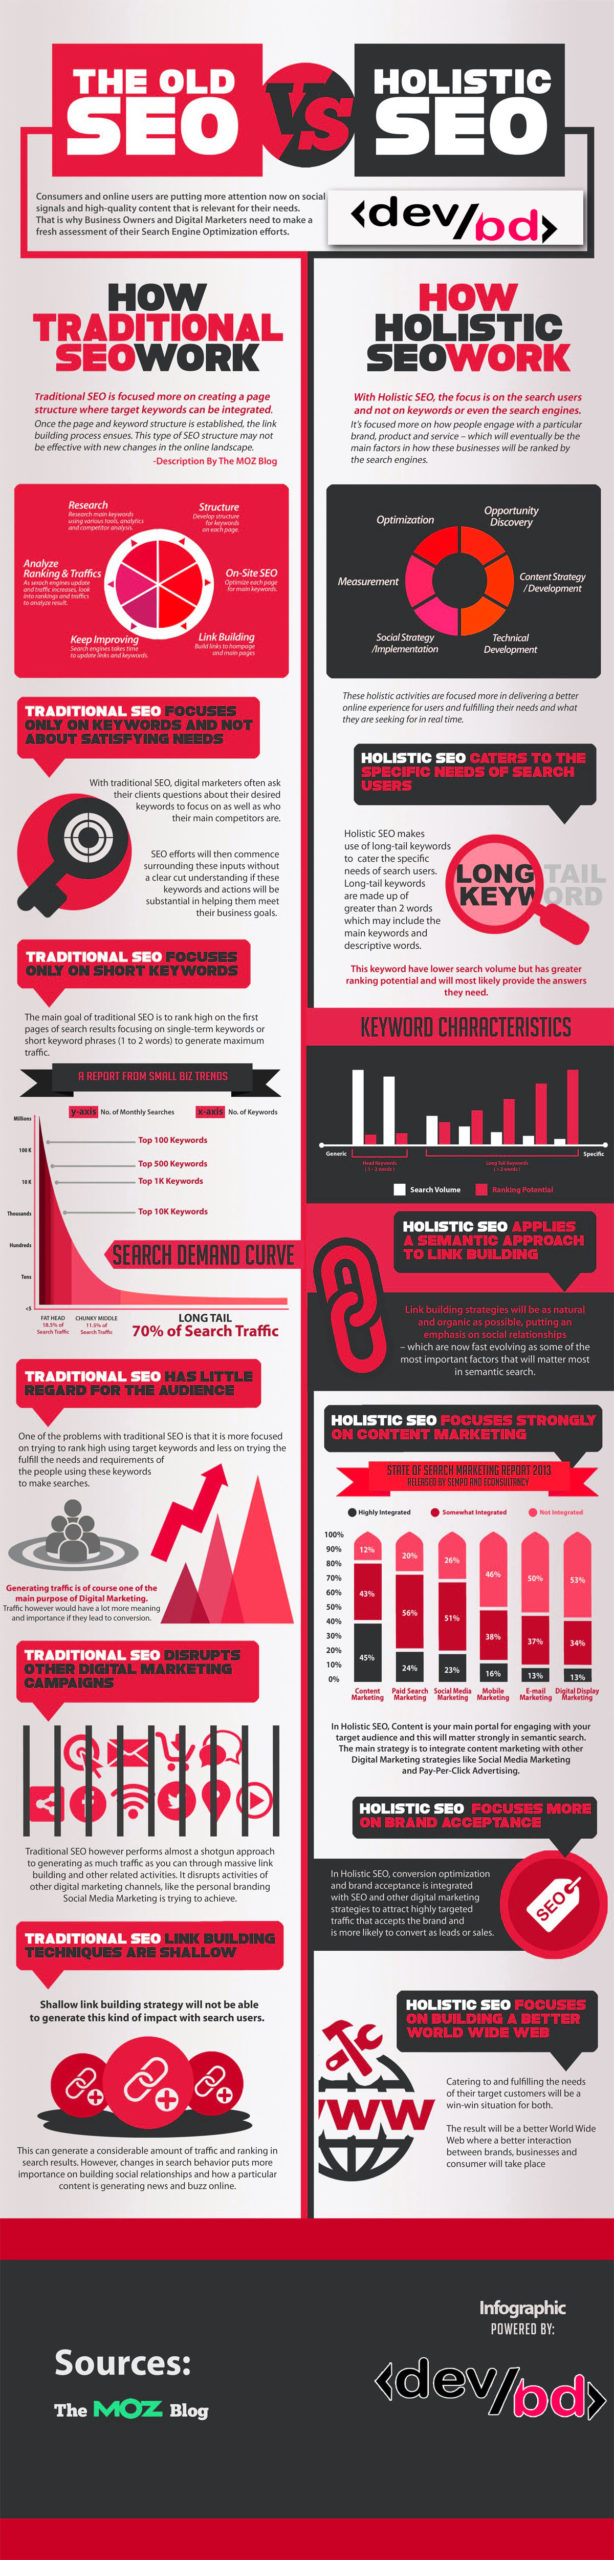 Seo Services Infographic